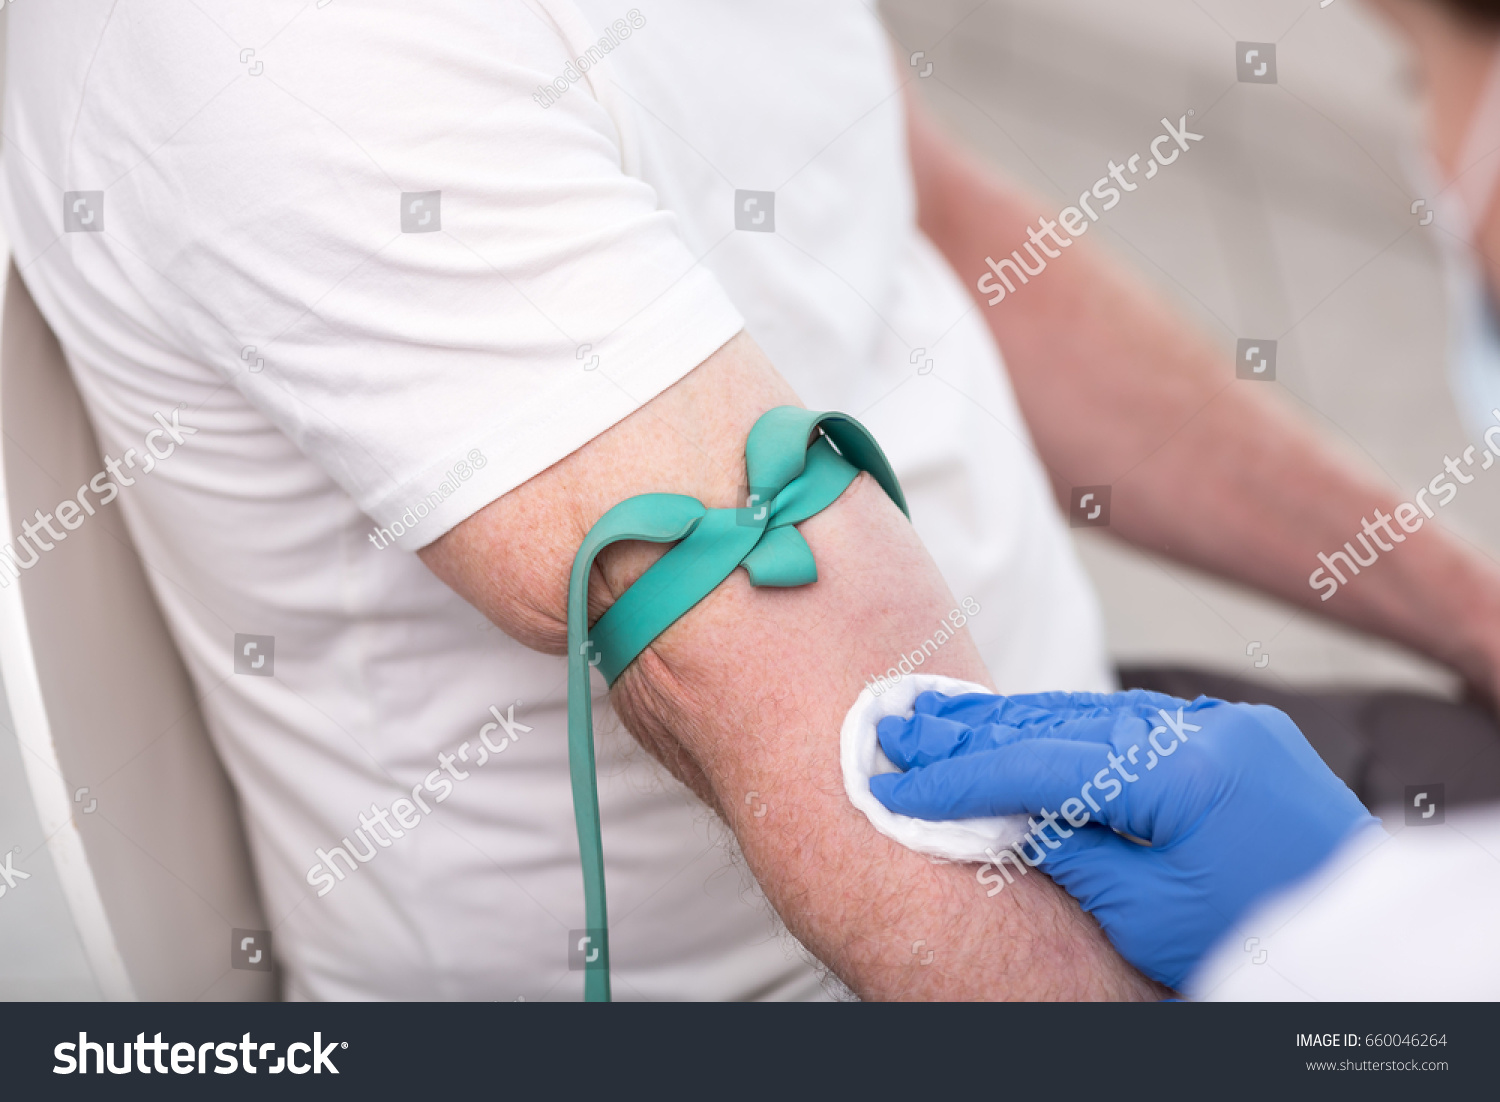 Disinfecting of the skin before an injection #660046264